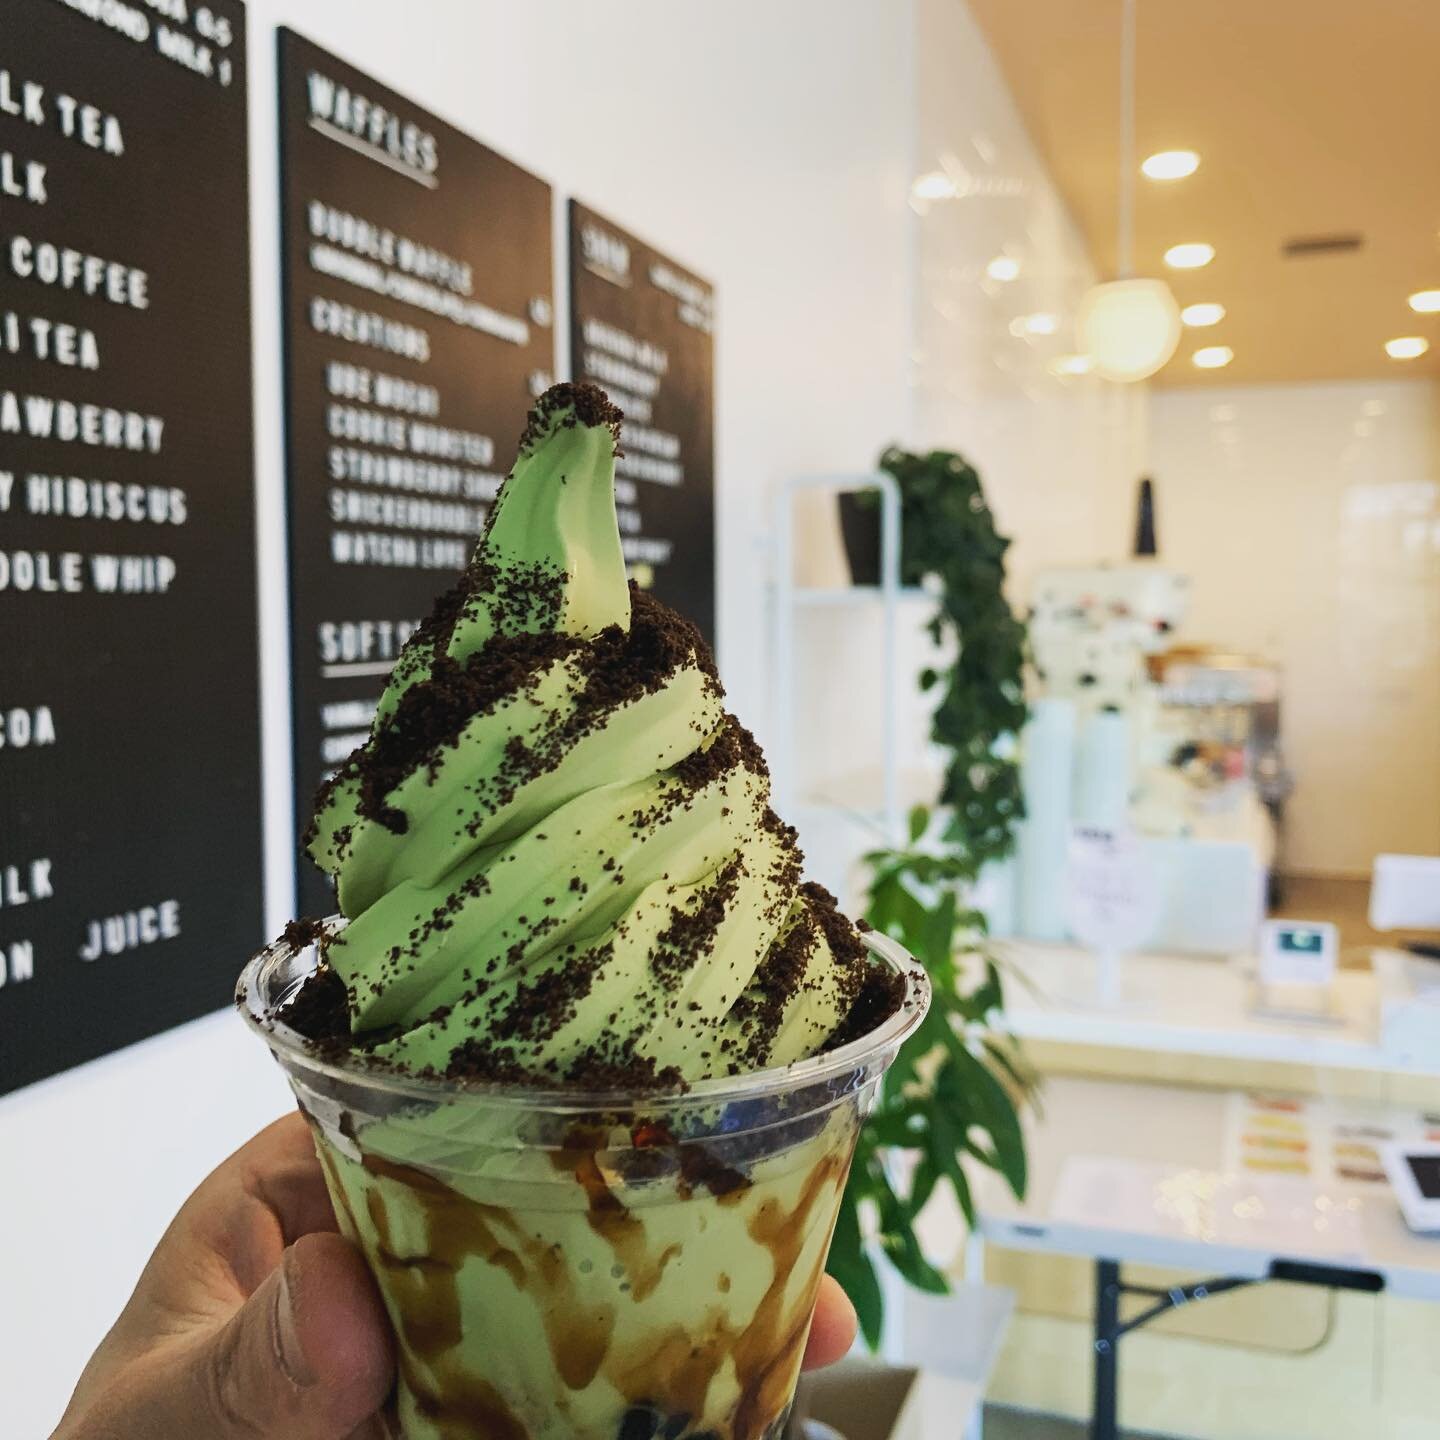 Iceskimo Eastlake just added Matcha and Chocolate softies! Del Mar is now swirling Vanilla/Chocolate/Strawberry/Ube softies through the long weekend.